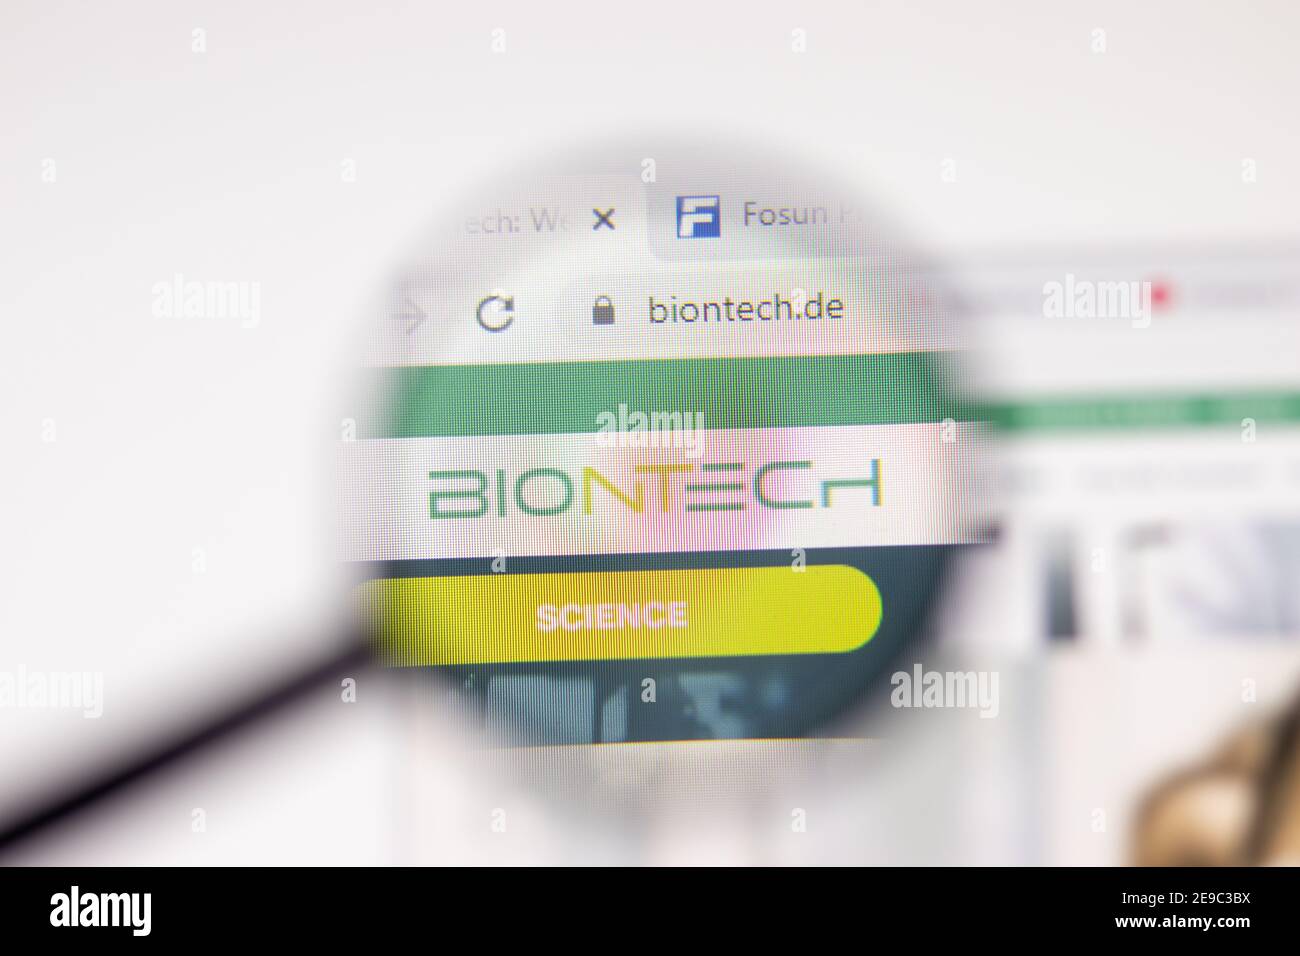 Los Angeles, USA - 1 February 2021: BioNTech website page. BioNTech.de logo on display screen, Illustrative Editorial Stock Photo